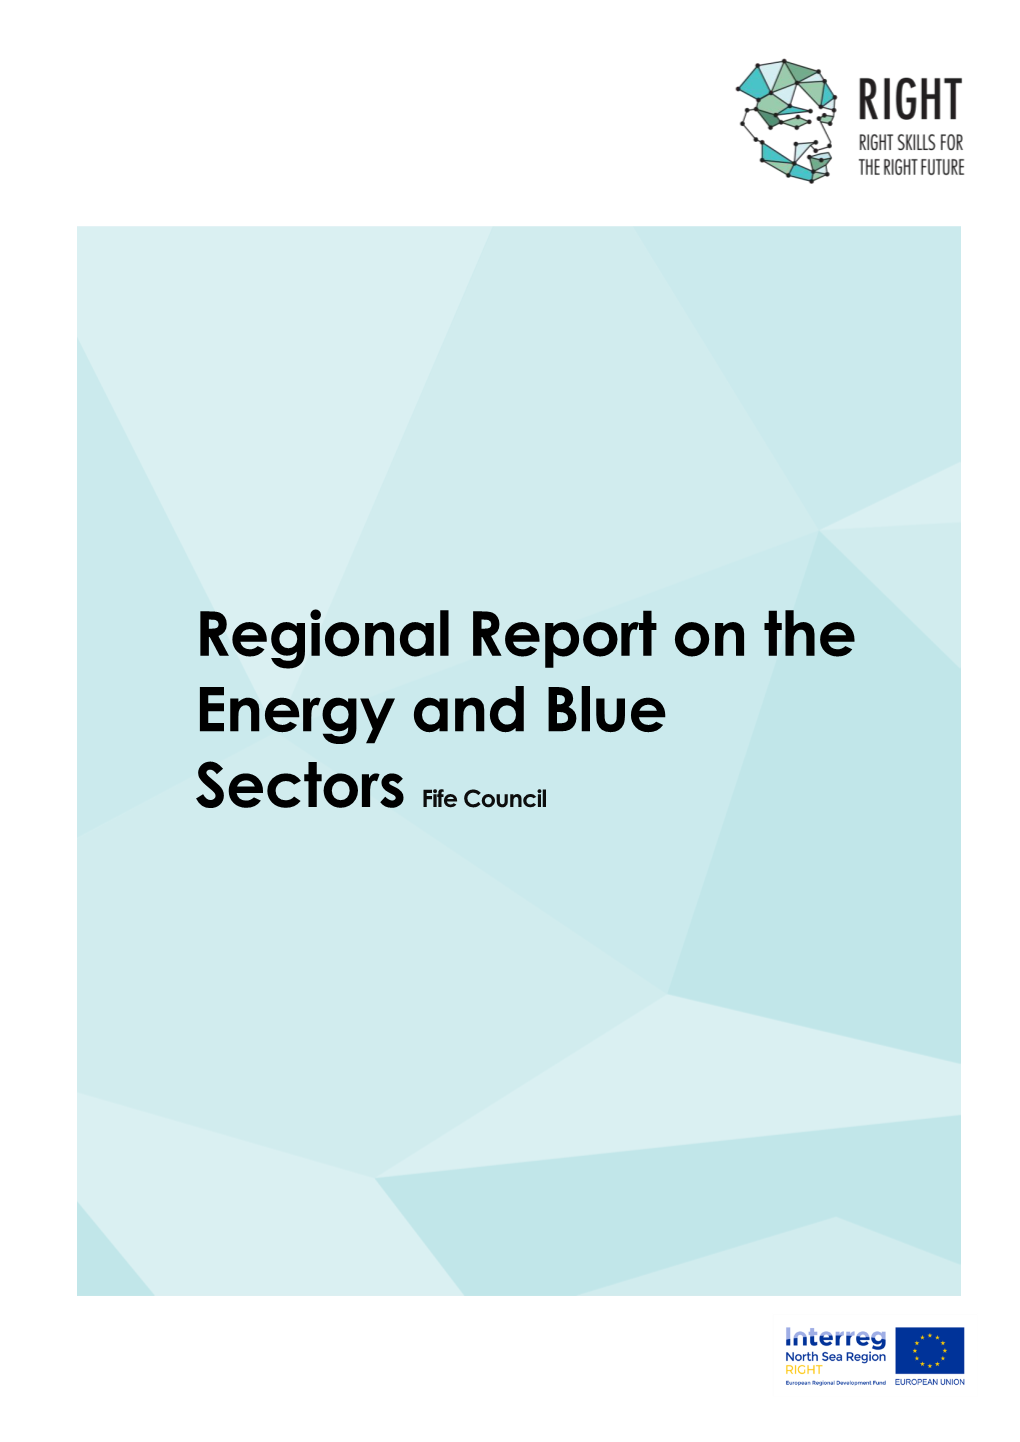 Regional Report on the Energy and Blue Sectors